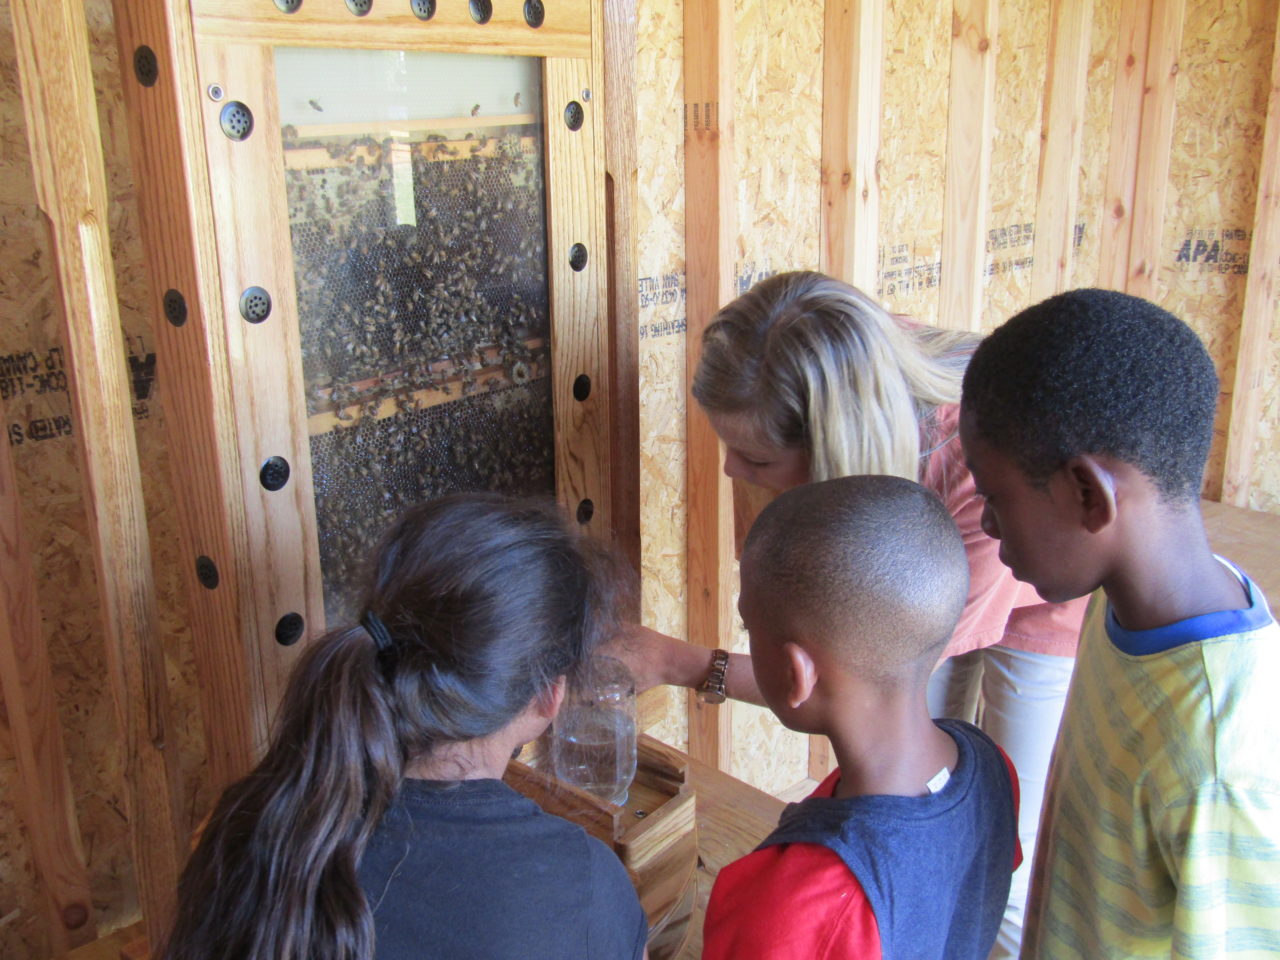 Destination Ag students explored the world of bees at the new observation beehive this year at ABAC’s Georgia Museum of Agriculture and Historic Village.